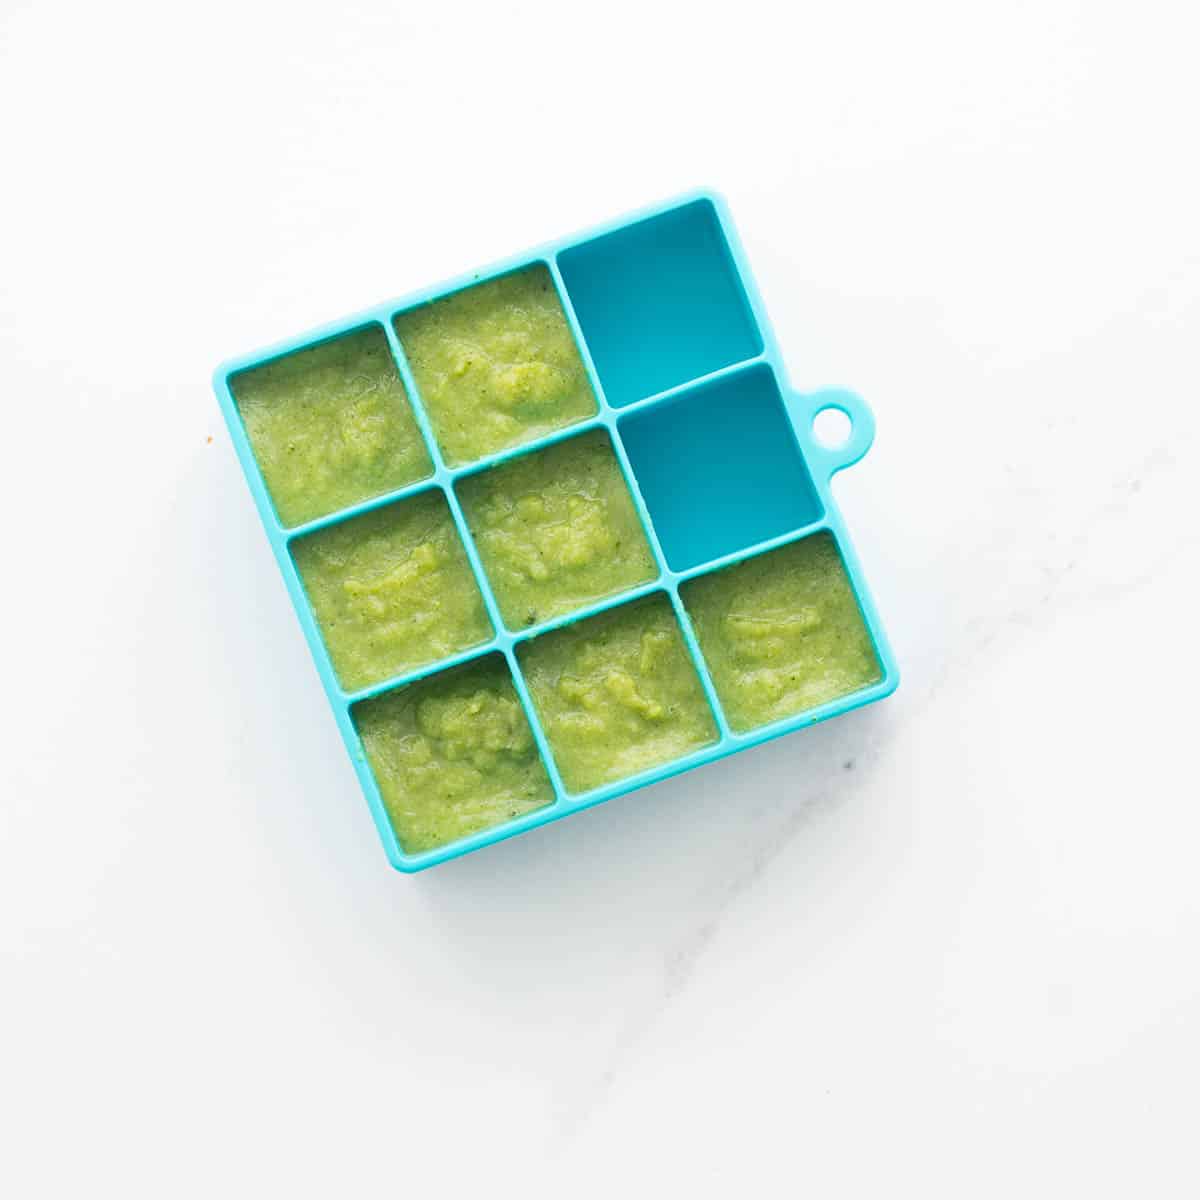 Broccoli puree in a blue silicone ice cube tray ready to be frozen.